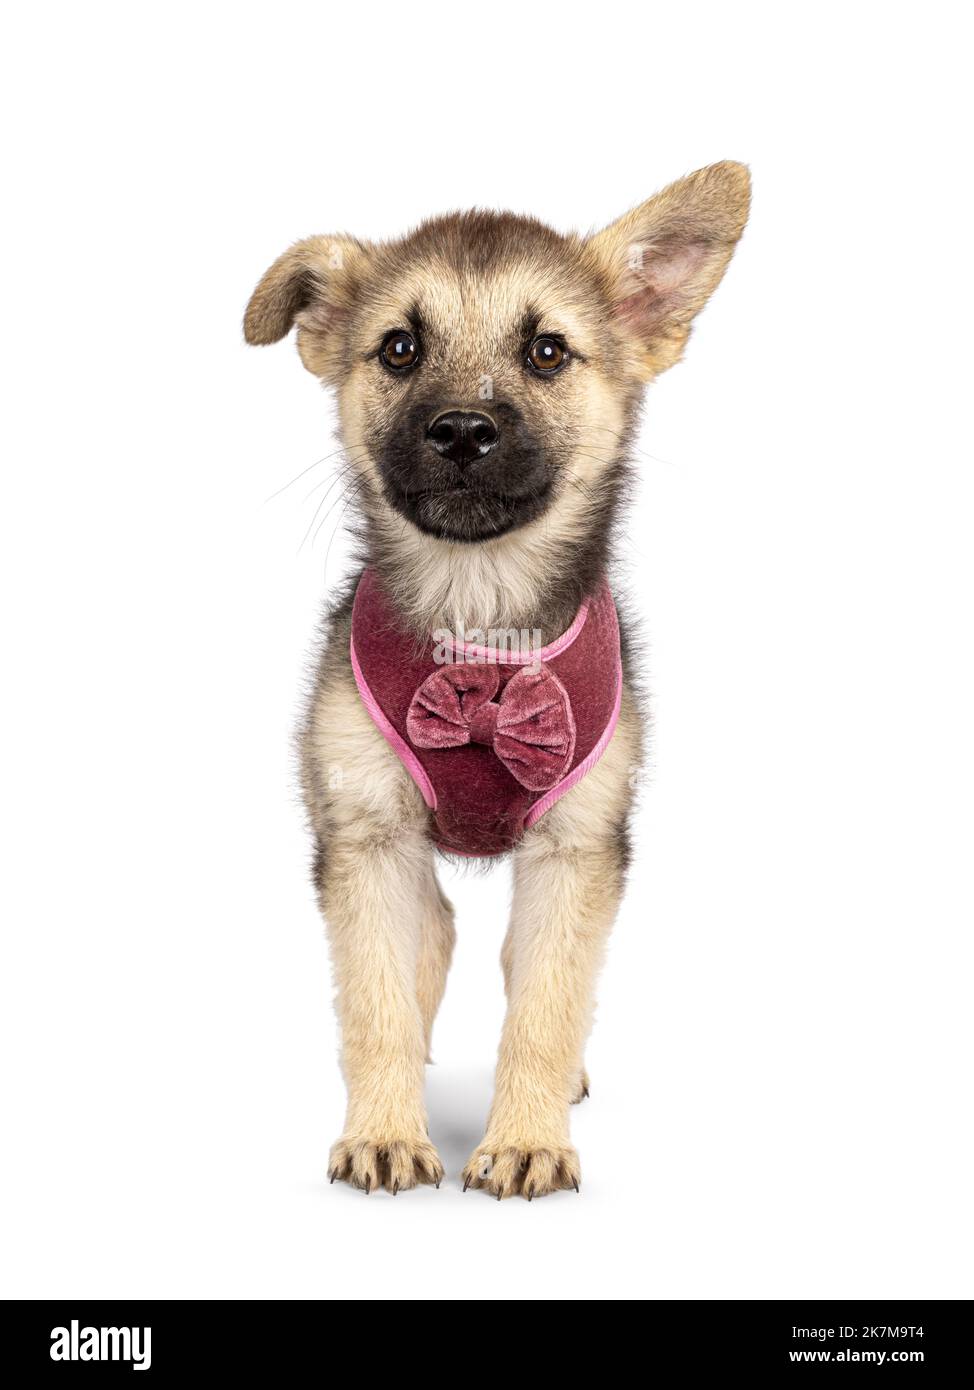 Adorable brown with black mixed Mudi and Germand Shepherd dog puppy, wearing harness. Standing up facing front. Looking towards camera with one floppy Stock Photo